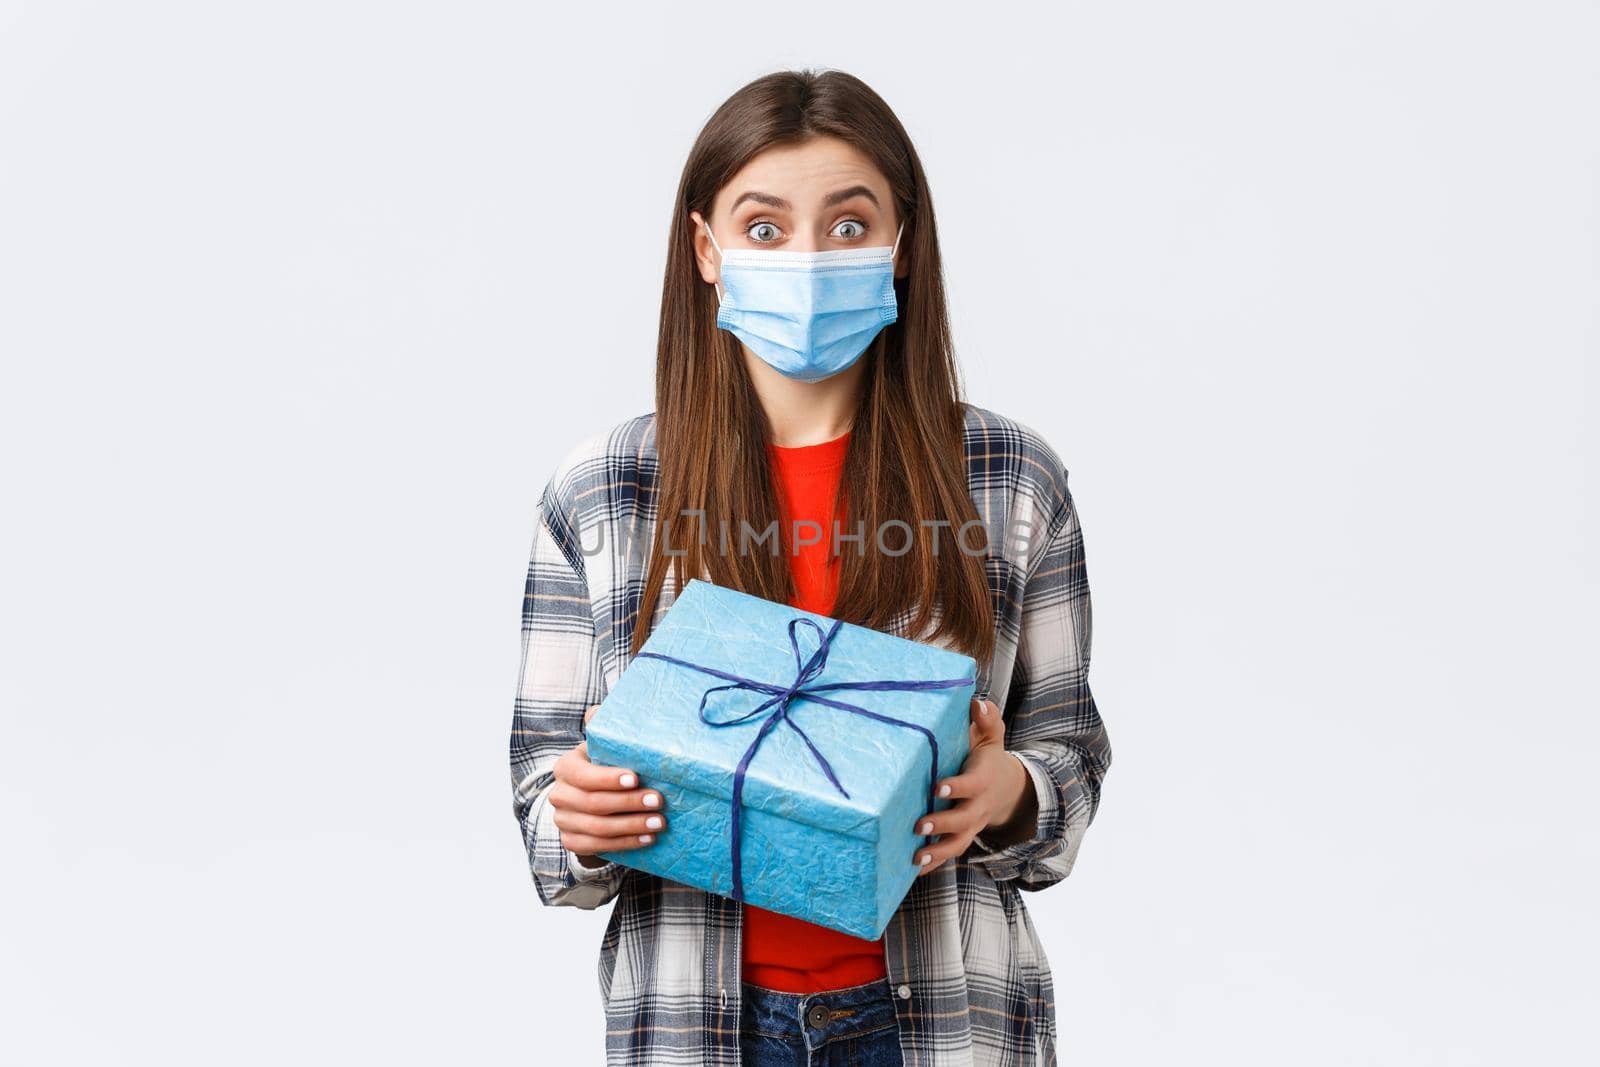 Covid-19, lifestyle, holidays and celebration concept. Excited cute birthday girl holding wrapped box, curious what inside, receive gift, wearing medical mask to prevent coronavirus outbreak.